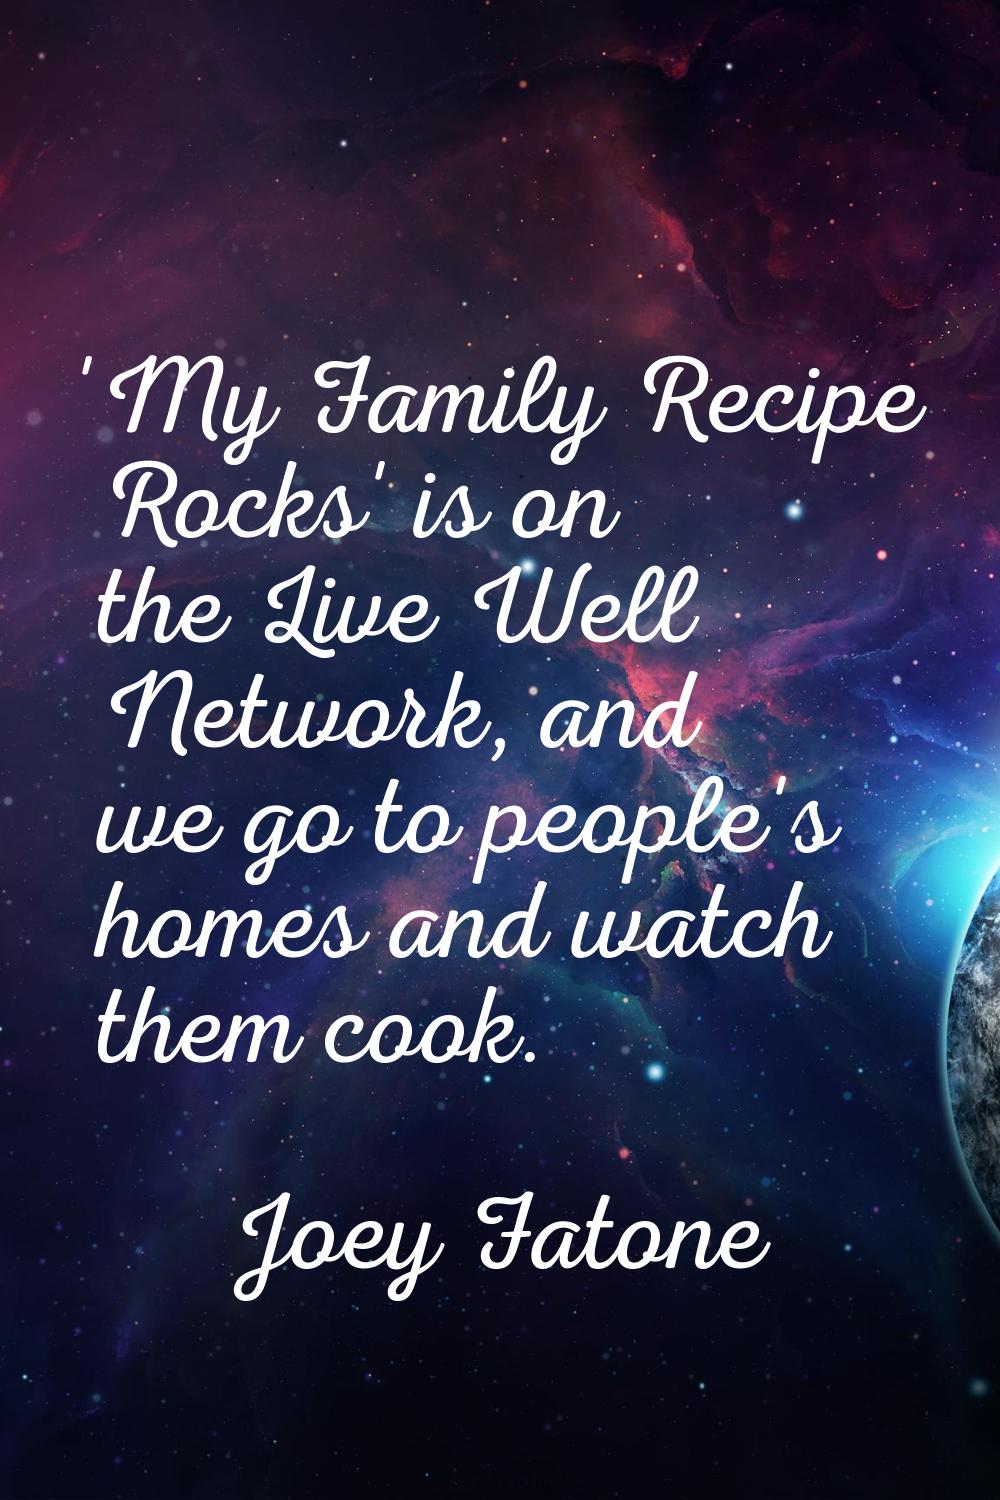 'My Family Recipe Rocks' is on the Live Well Network, and we go to people's homes and watch them co